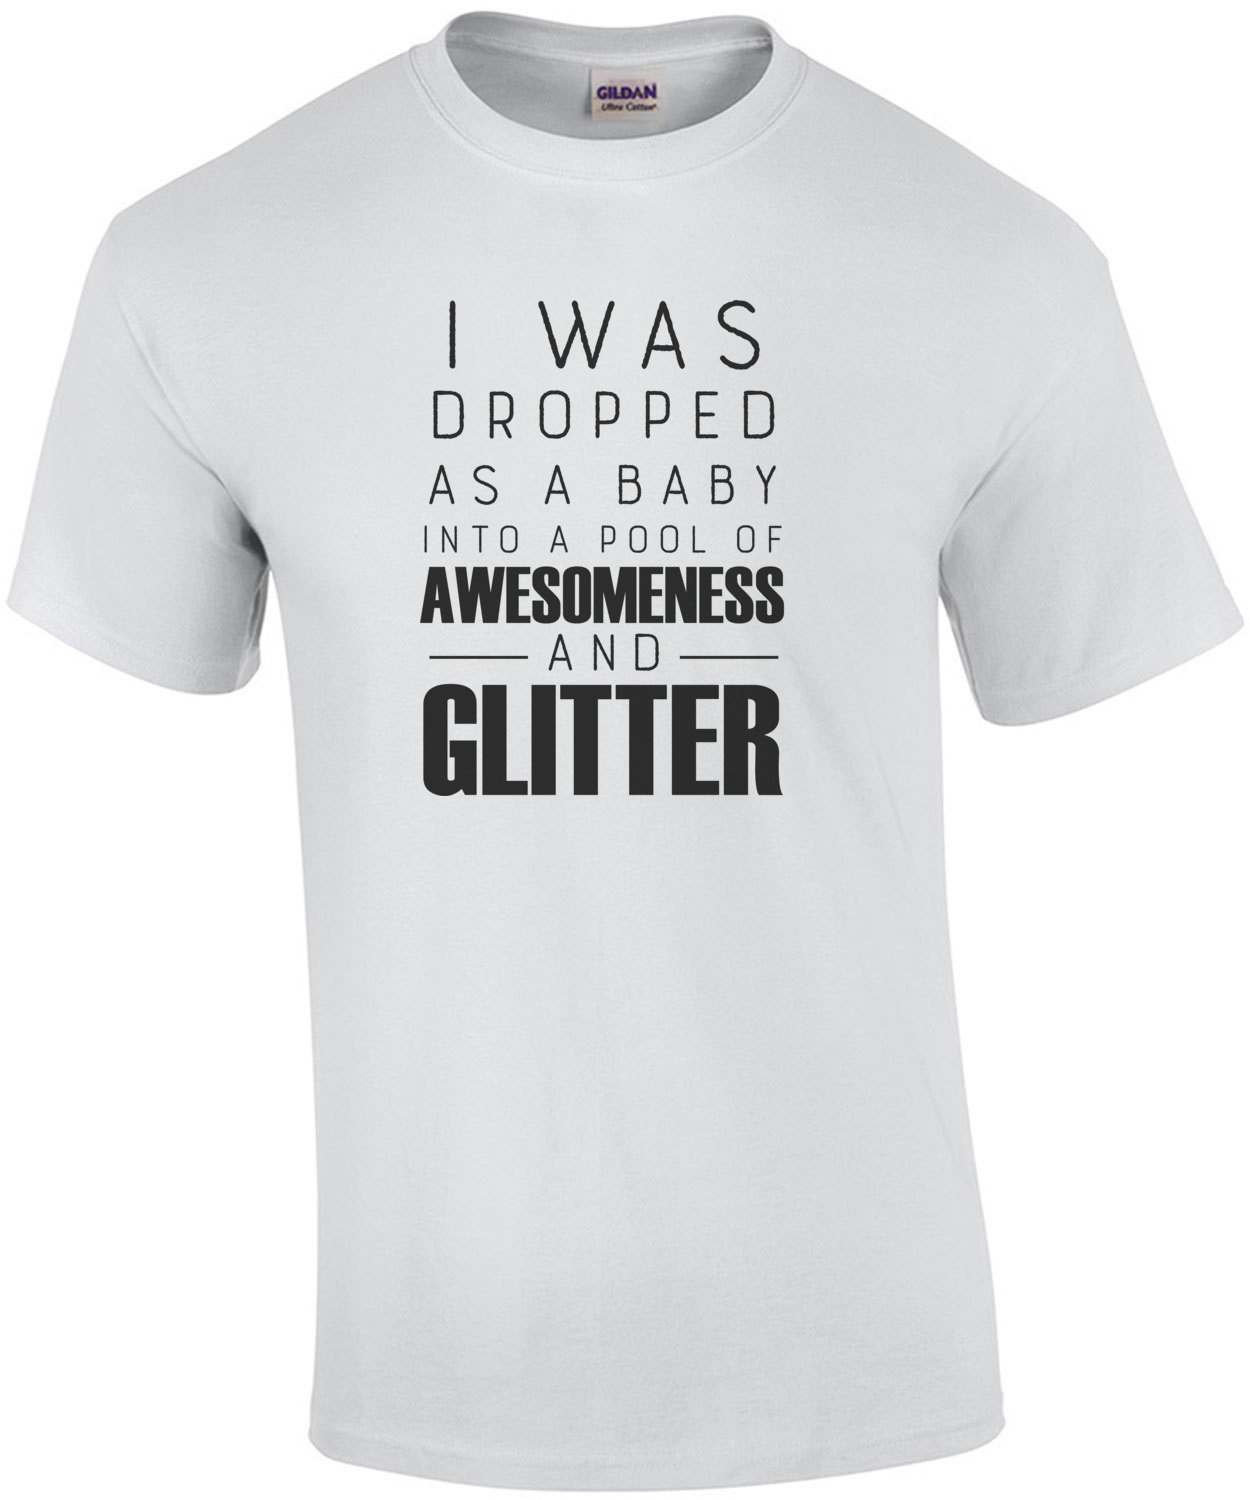 I was dropped as a baby into a pool of awesomeness and glitter - funny t-shirt